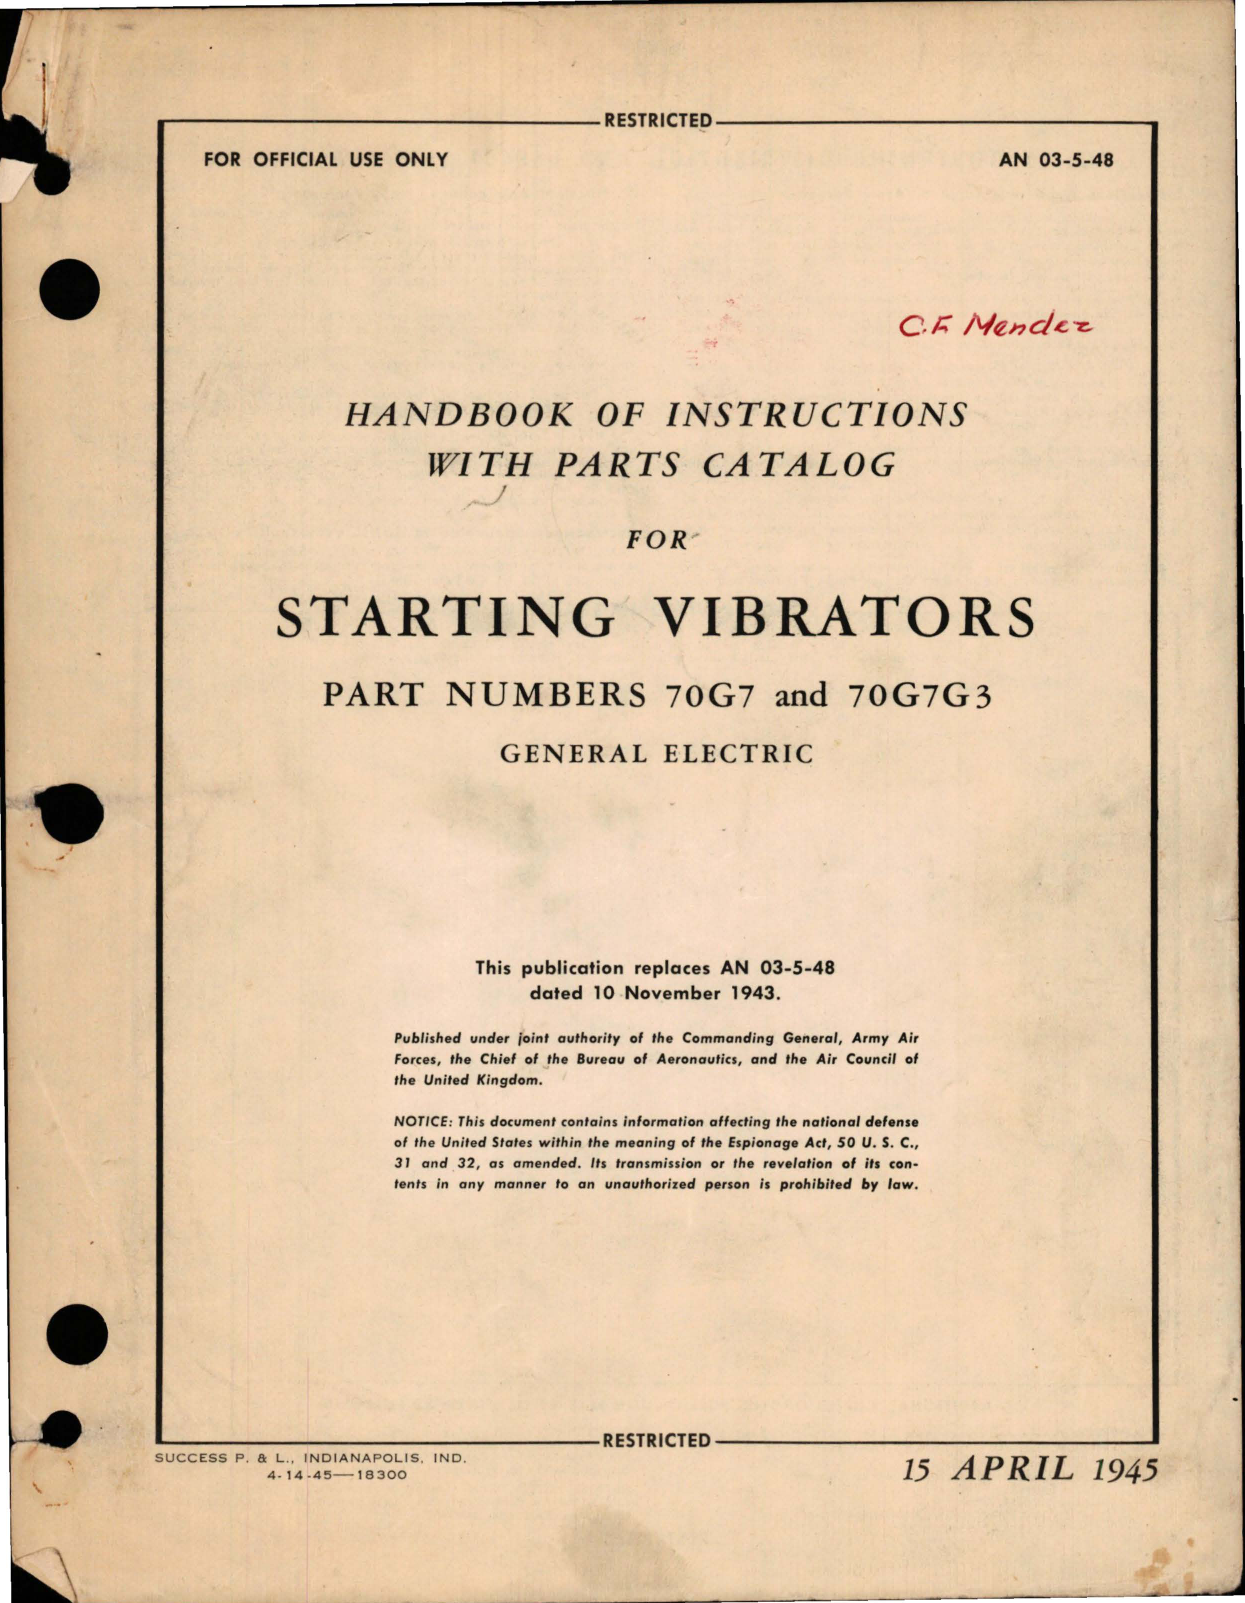 Sample page 1 from AirCorps Library document: Instructions with Parts Catalog for Starting Vibrators - Parts 70G7 and 70G7G3 